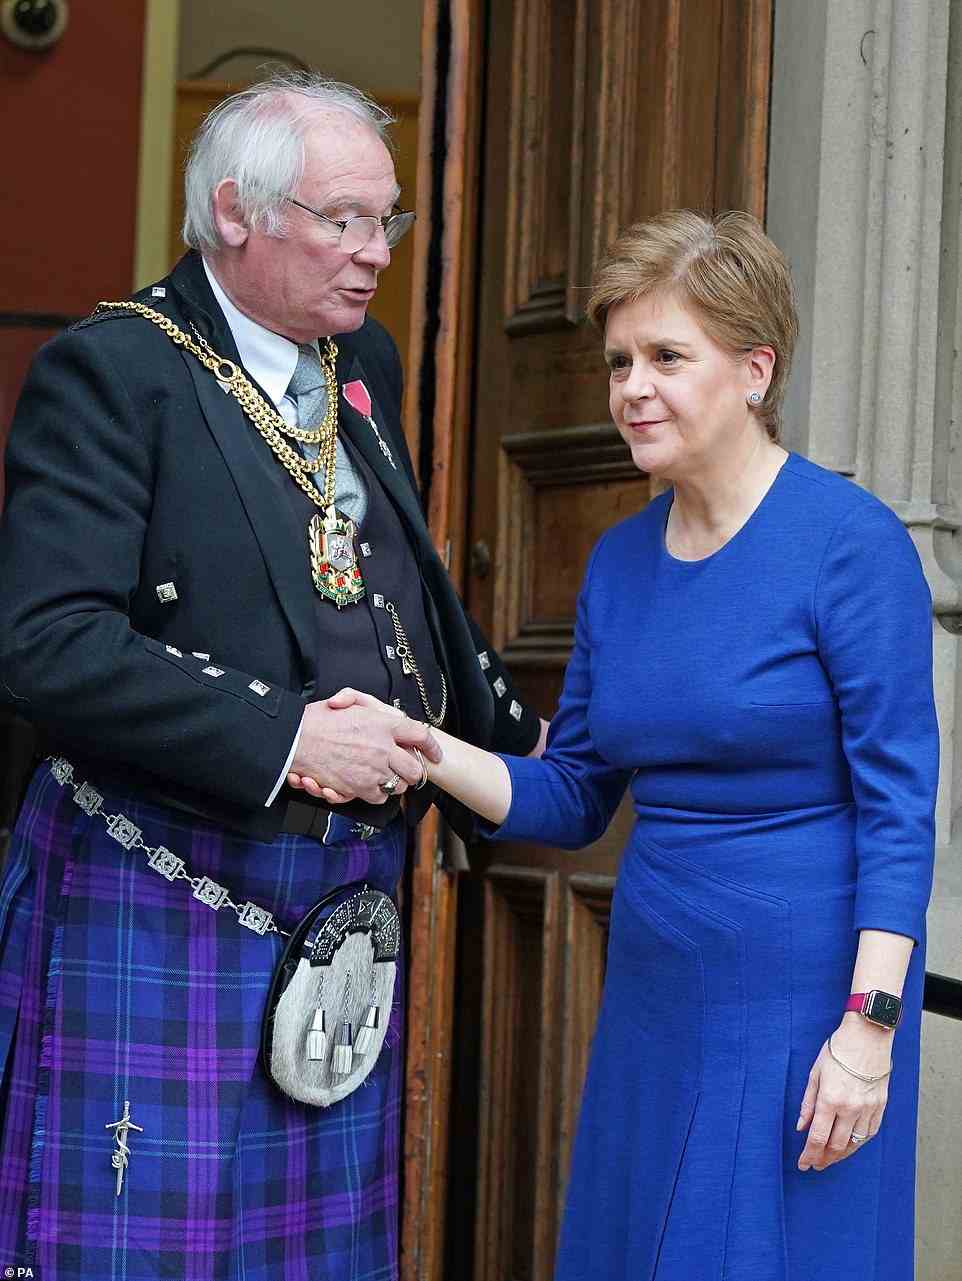 Nicola Sturgeon today received a frosty reception as she arrived ahead of King Charles for a historic city-making ceremony in Dunfermline. Pictured: First Minister Nicola Sturgeon is greeted by Lord Provost of Dunfermline Jim Leishman as she arrives at the City Chambers in Dunfermline, Fife